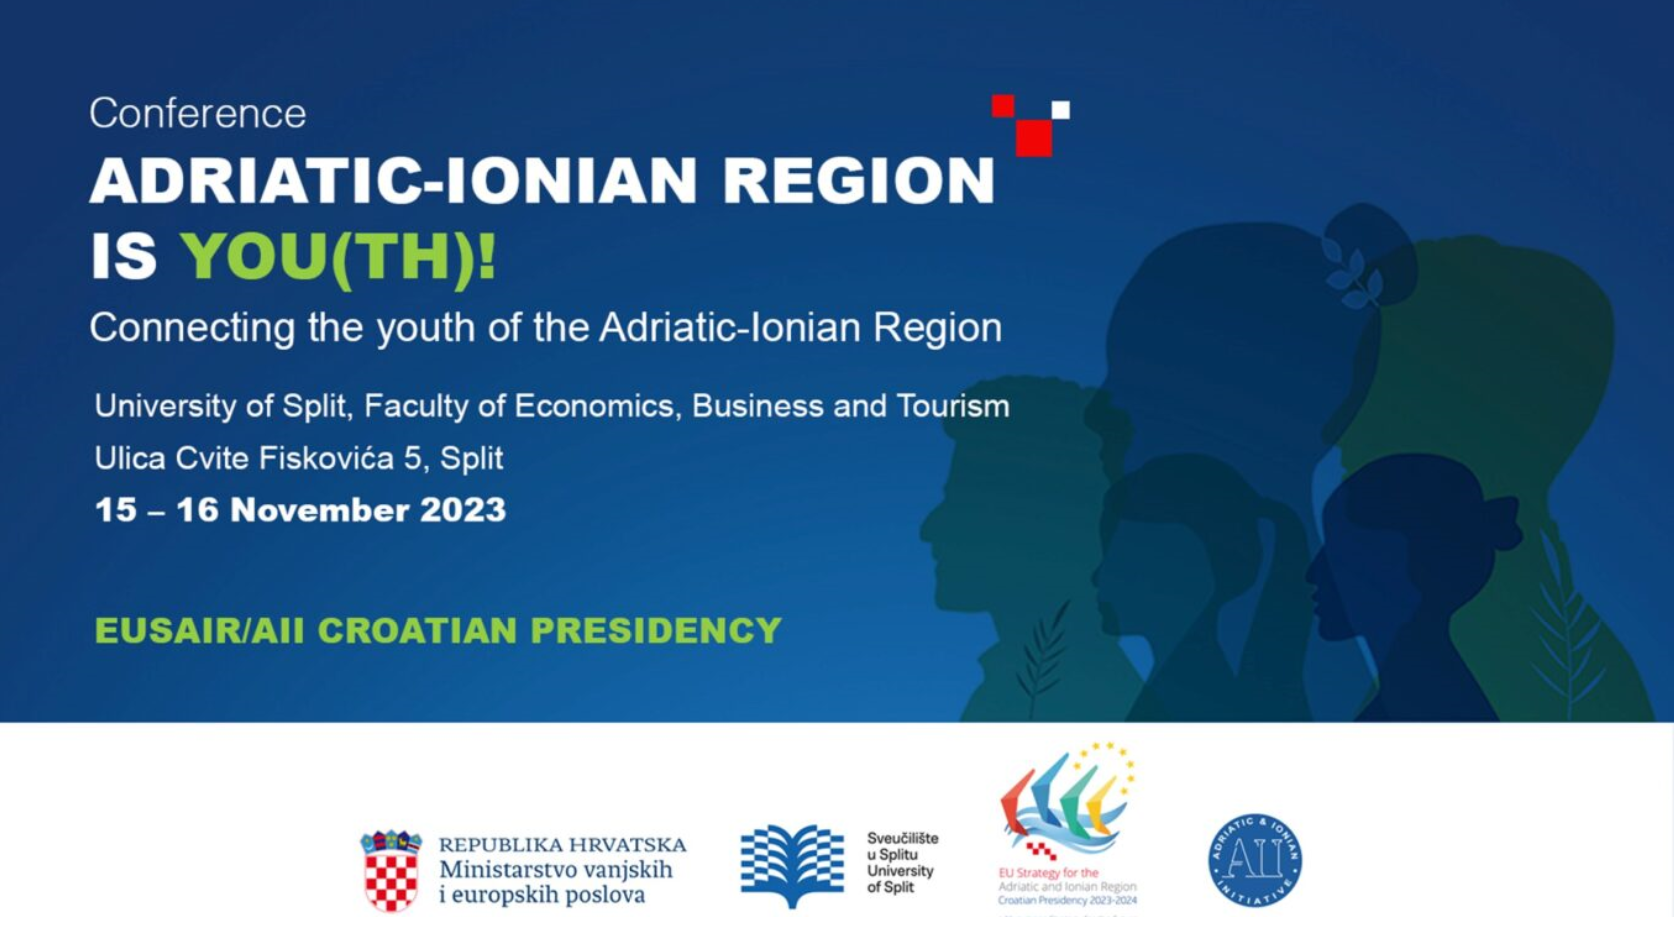 SAVE THE DATE - YOUTH CONFERENCE - 15-16 NOVEMBER 2023, SPLIT